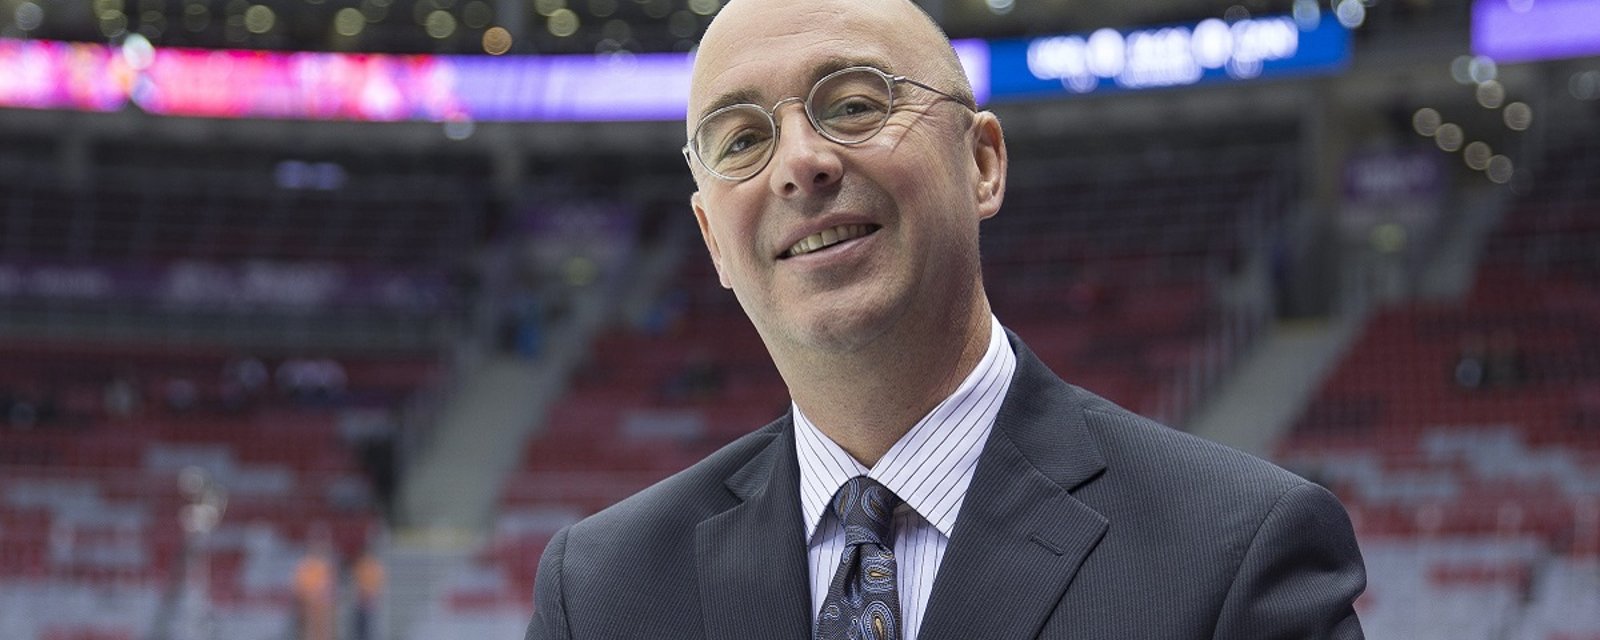 Pierre McGuire hints that Bruins GM may be handcuffed by ownership.